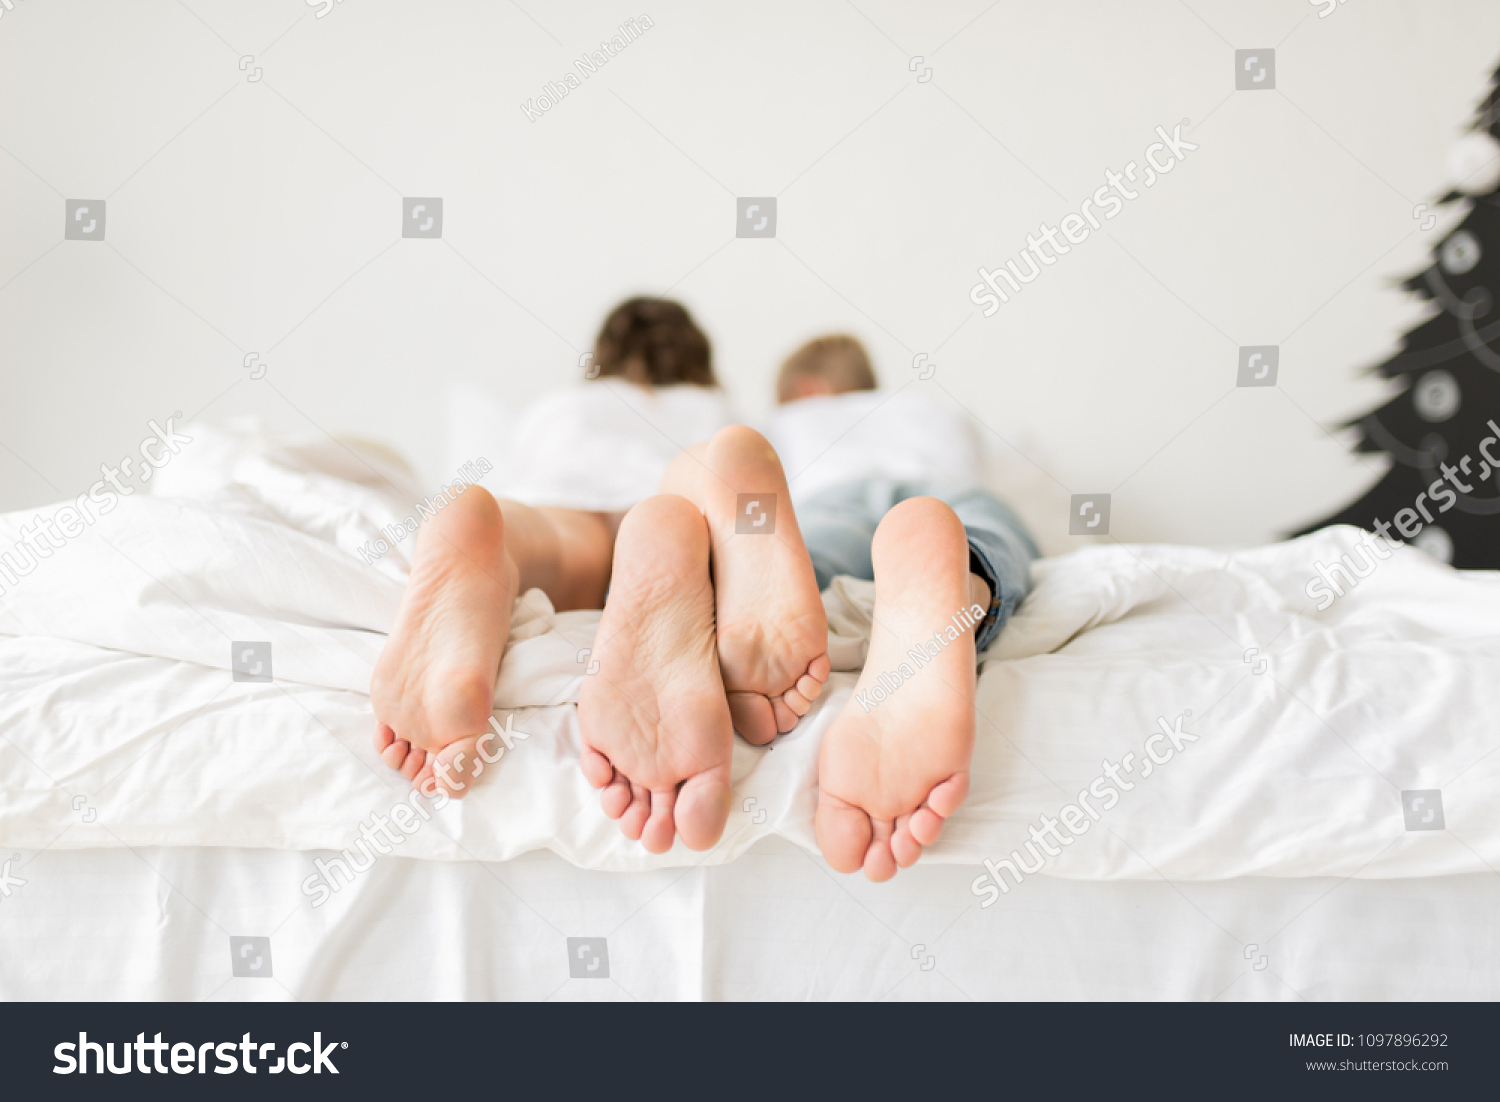 boy and girl bed